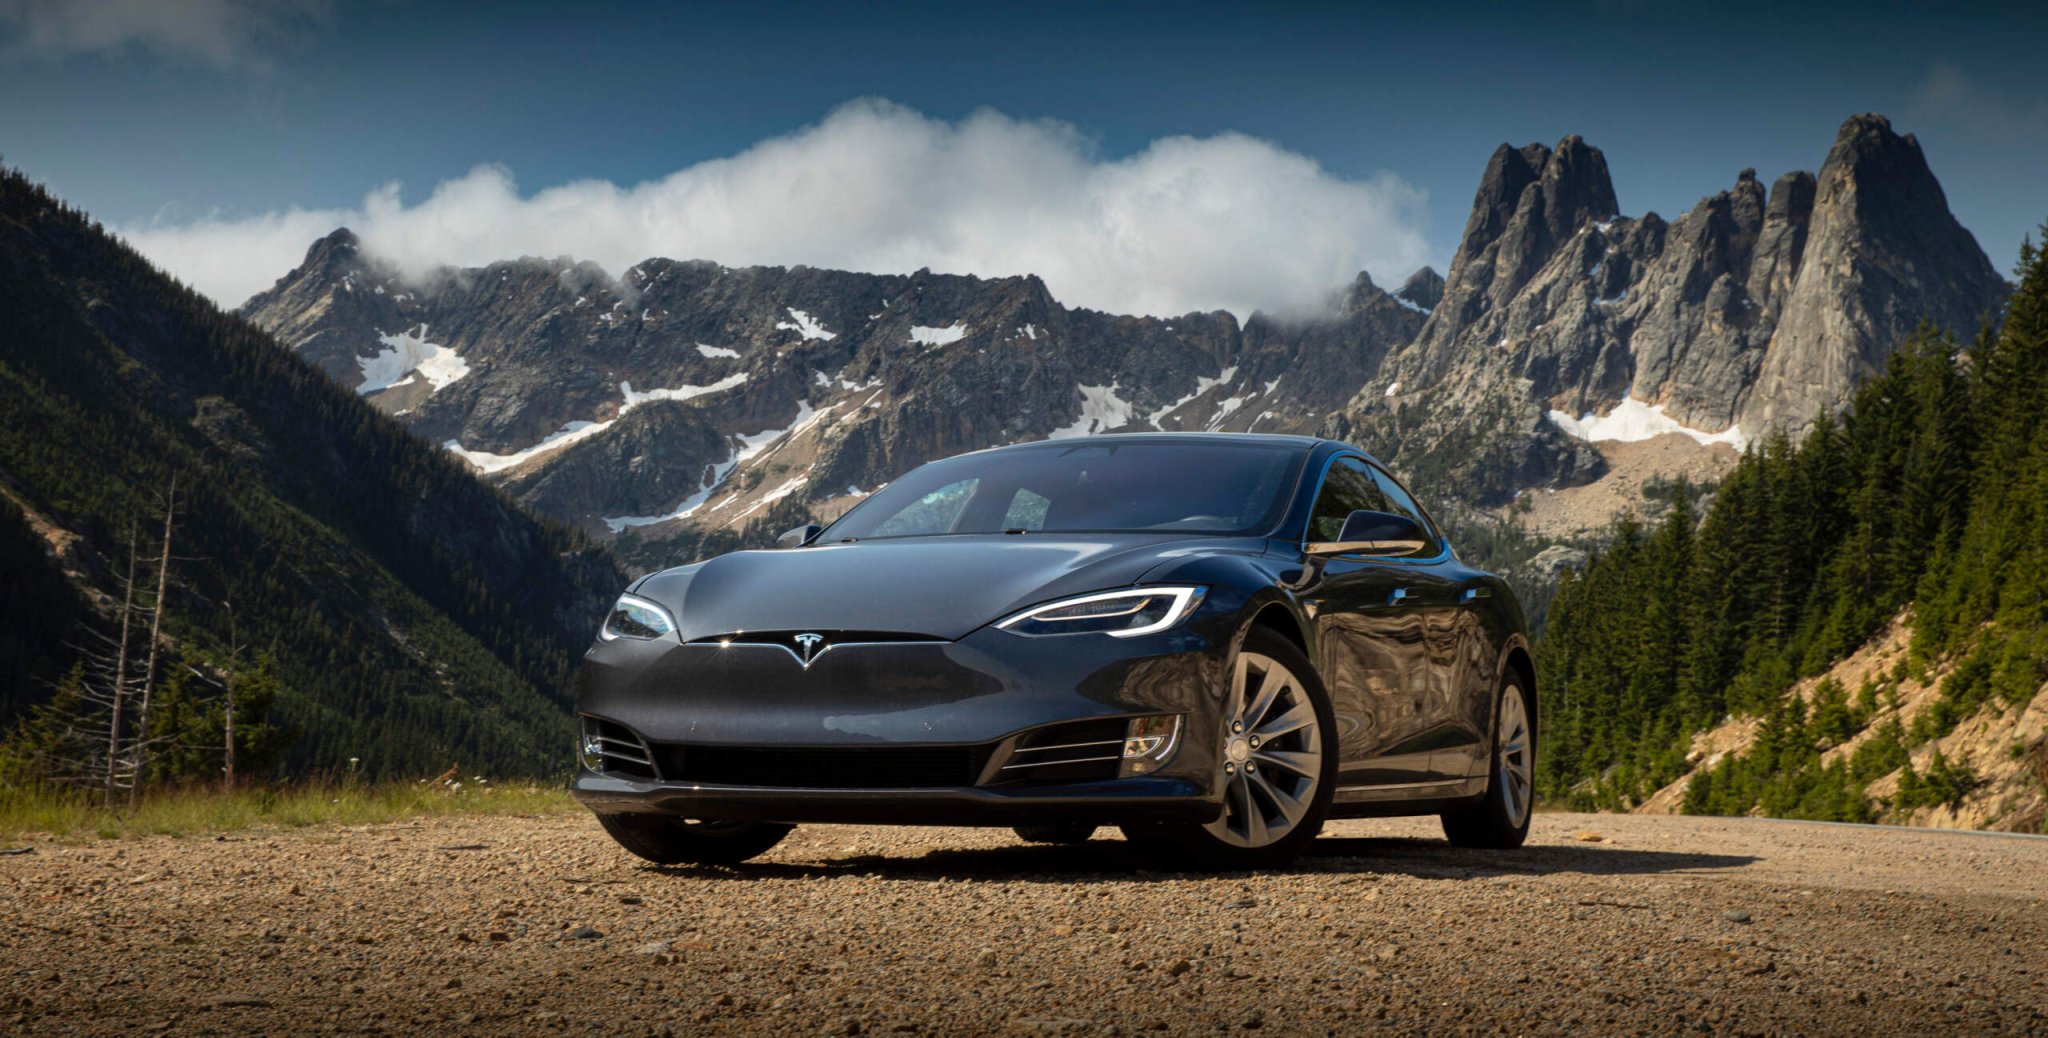 Tesla To Temporarily Shutdown Production Of Model S and X